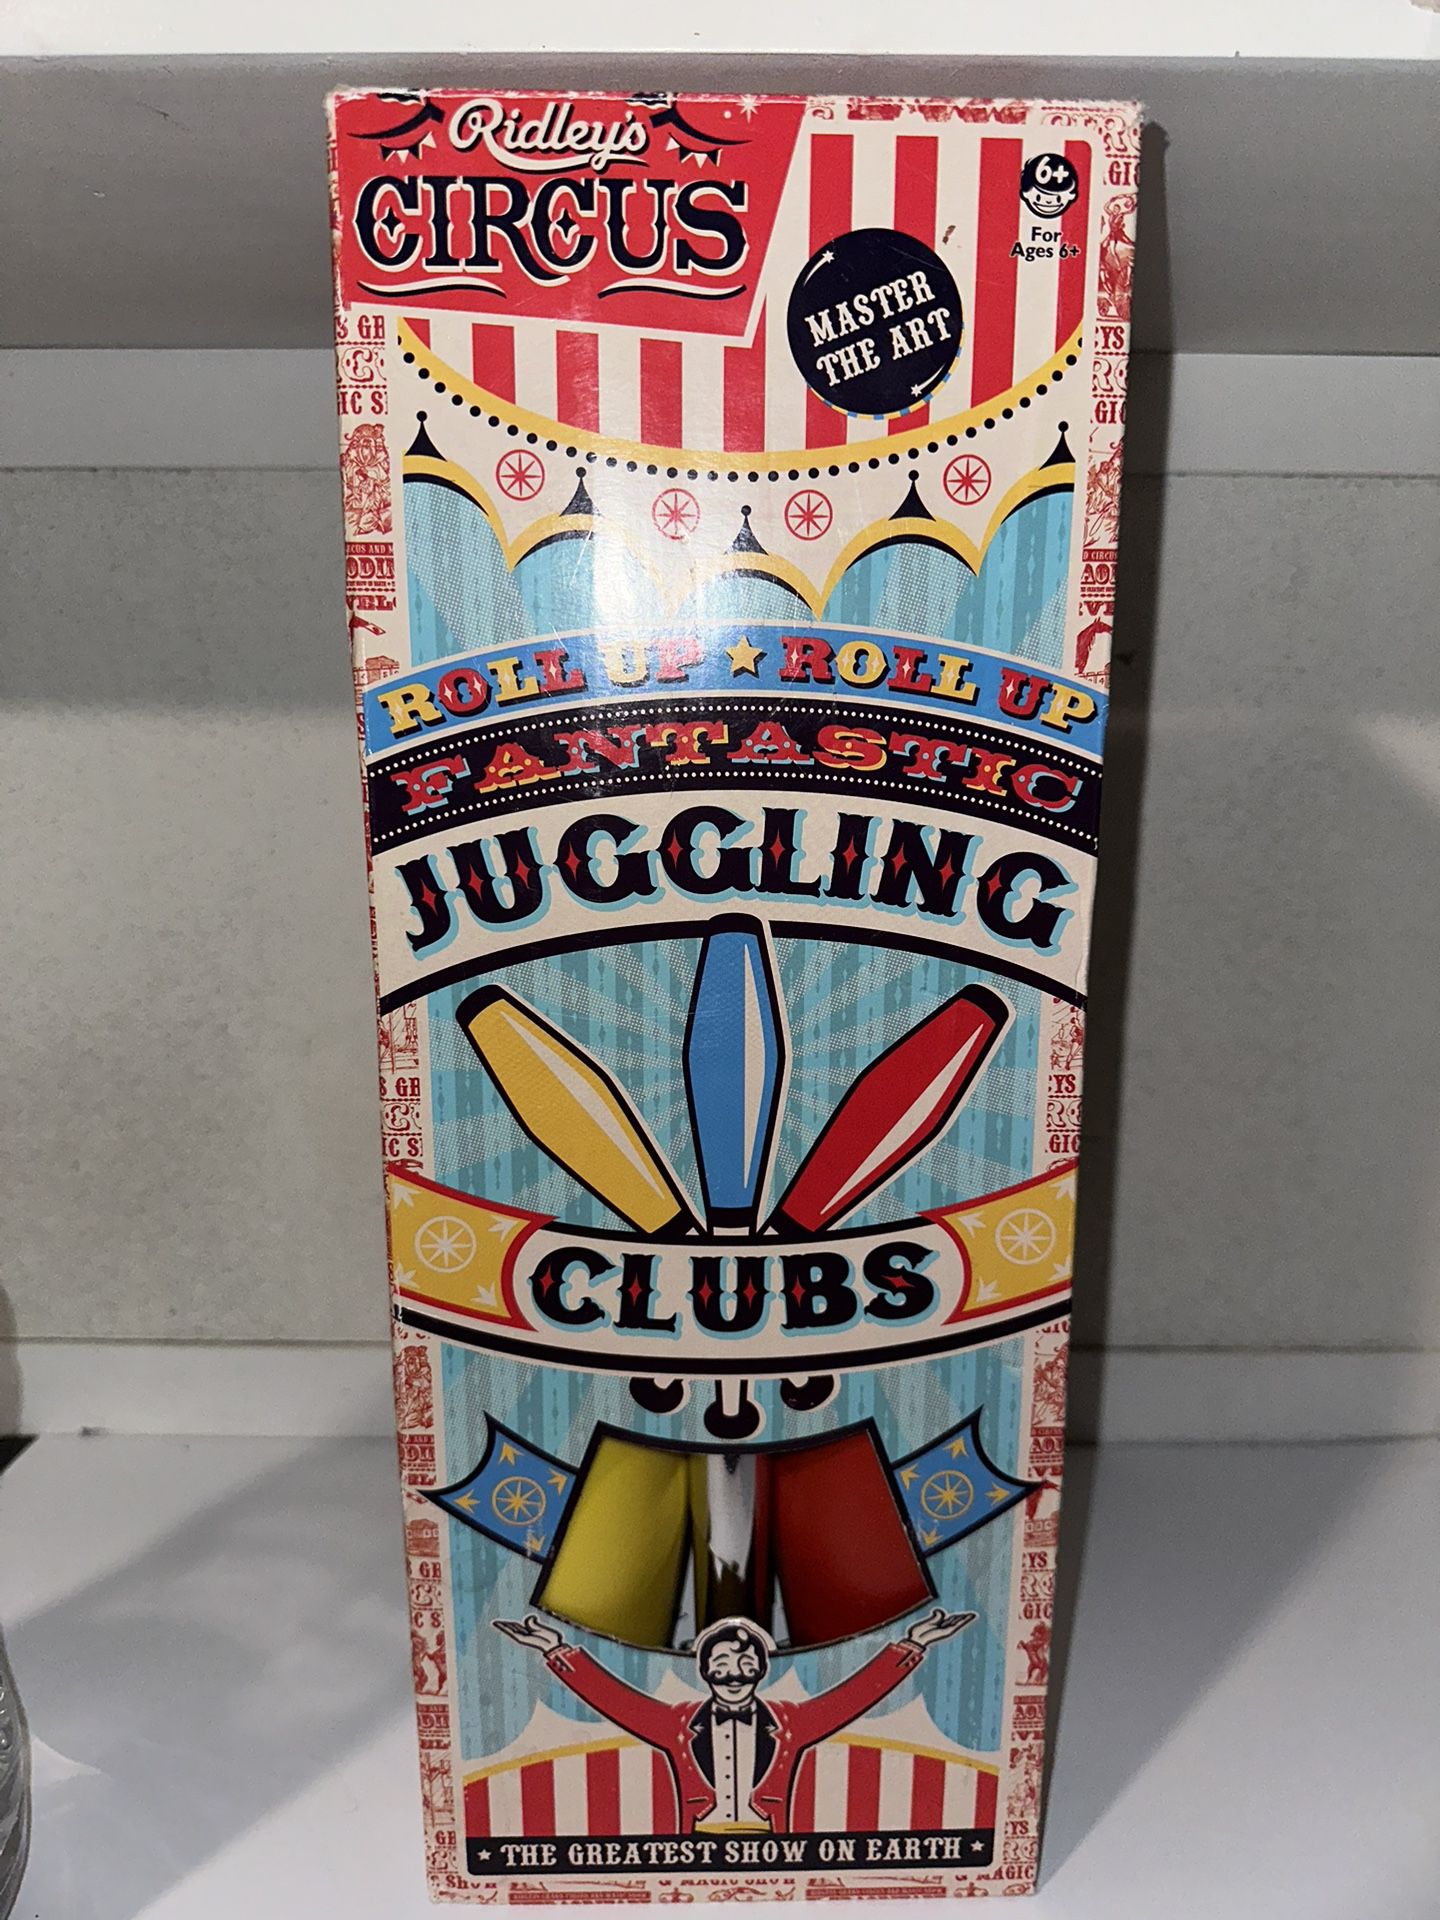 Ridleys Circus Roll Up Fantastic Juggling Clubs Wild & Wolf